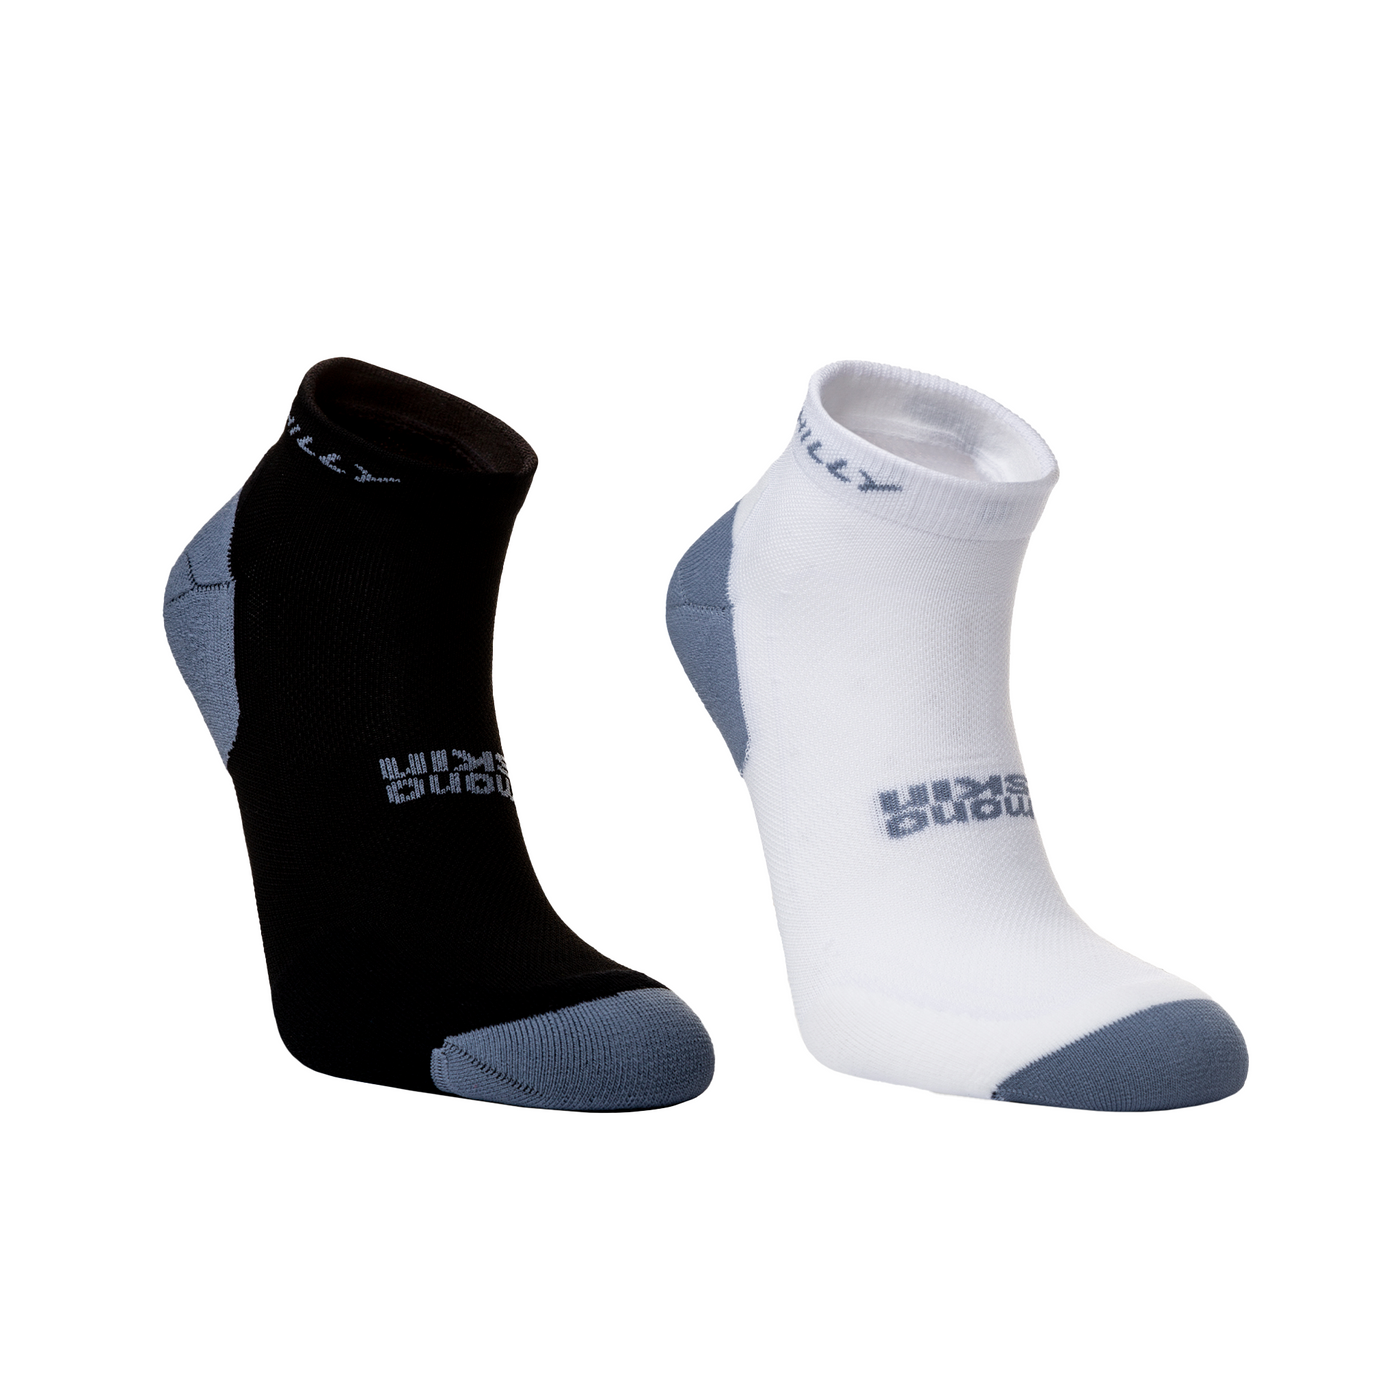 Hilly Active Quarter Min Twin Pack - White/Black/Grey